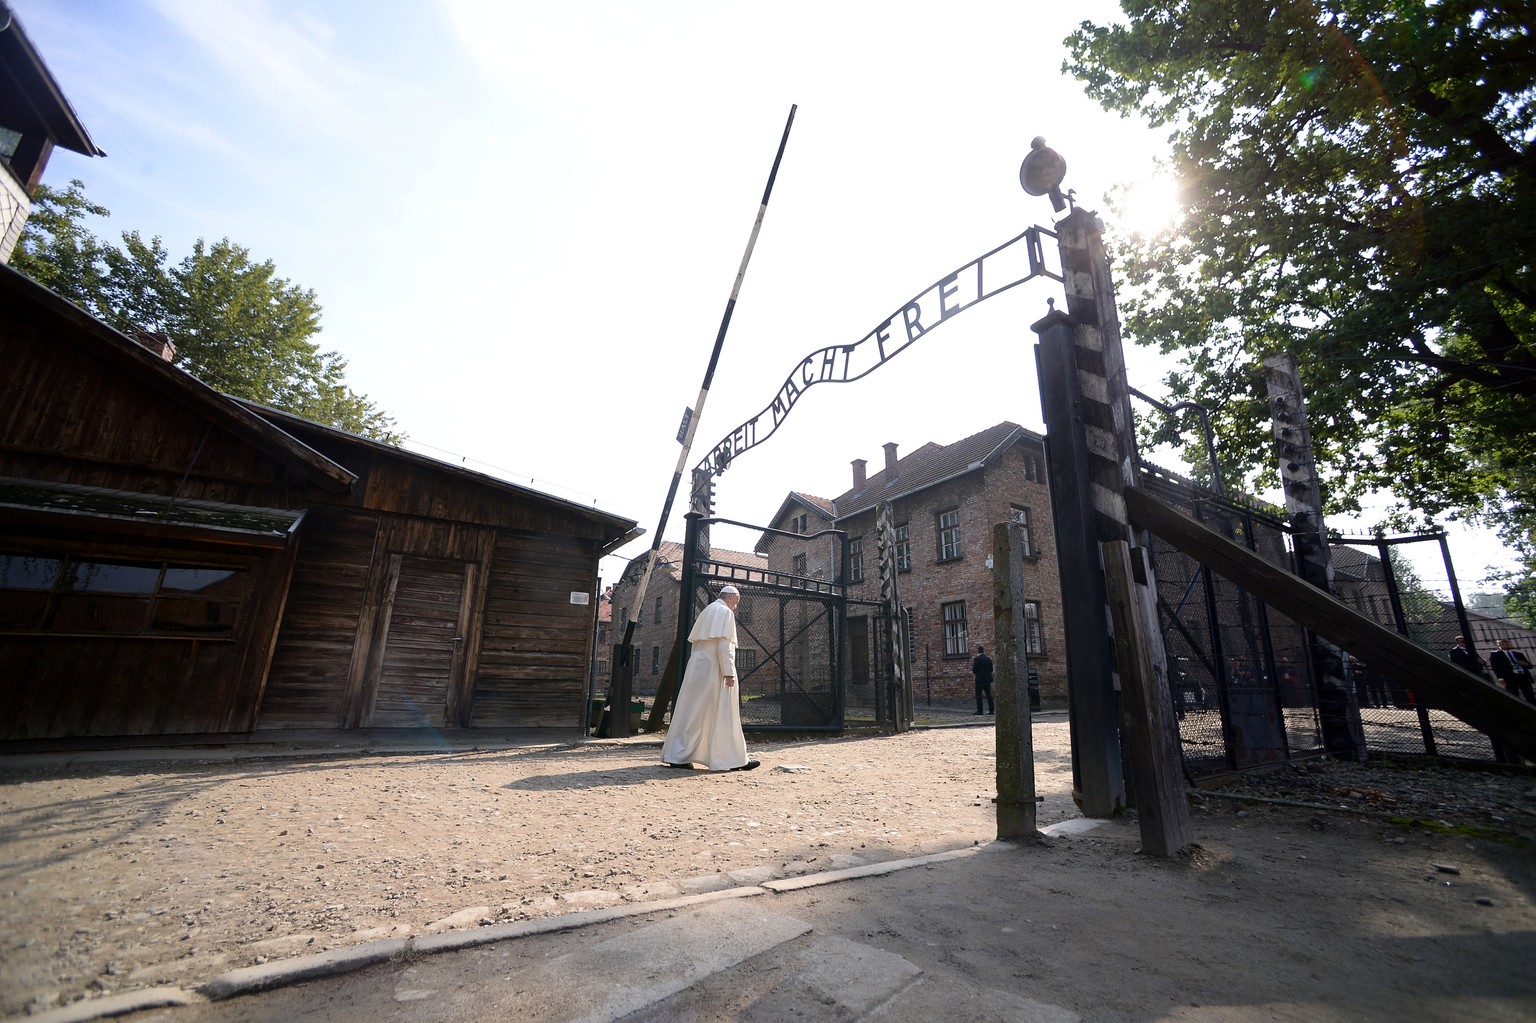 Pope Francis walks through Auschwitz&#039;s notorious gate with the sign &quot;Arbeit Macht Frei&quot; (Work sets you free) during his visit to the former Nazi death camp, Poland, July 29, 2016. REUTE ...